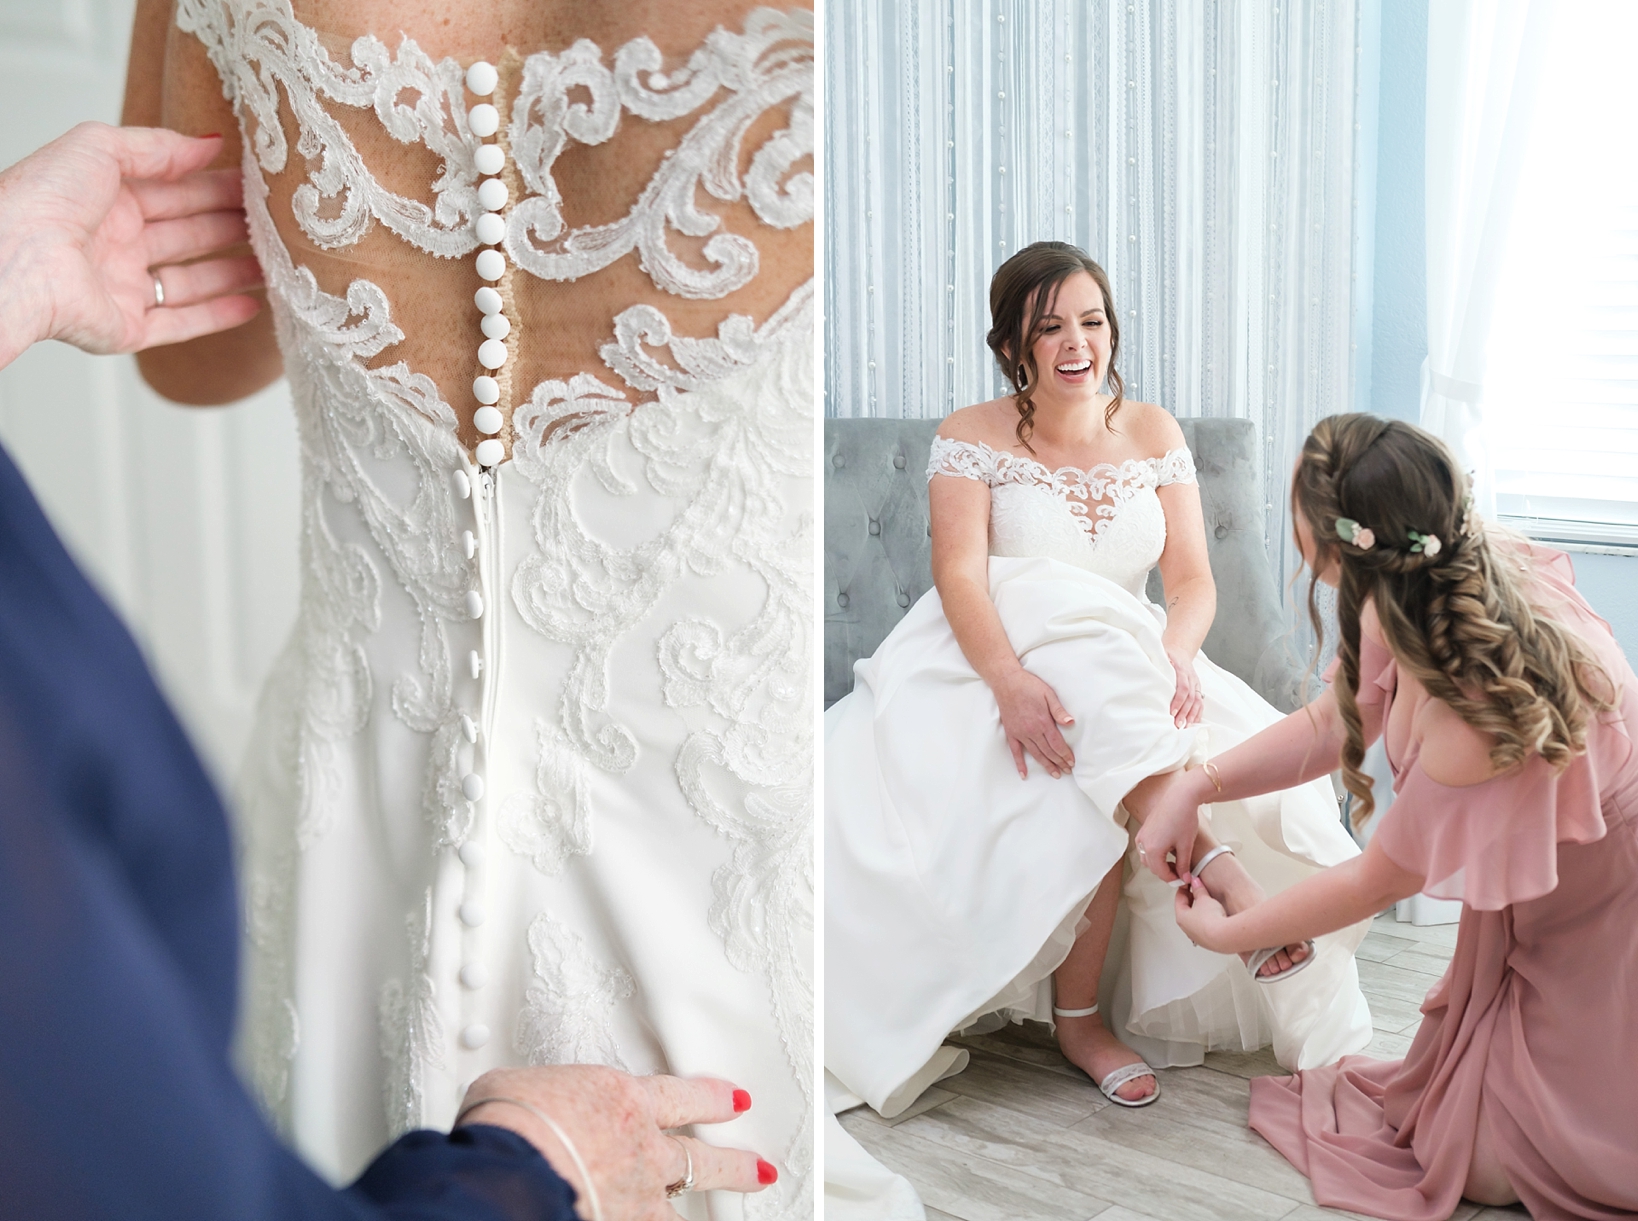 Detail shot f the lacework on the bride's dress and an image of her bridesmaid helping her into her shoes